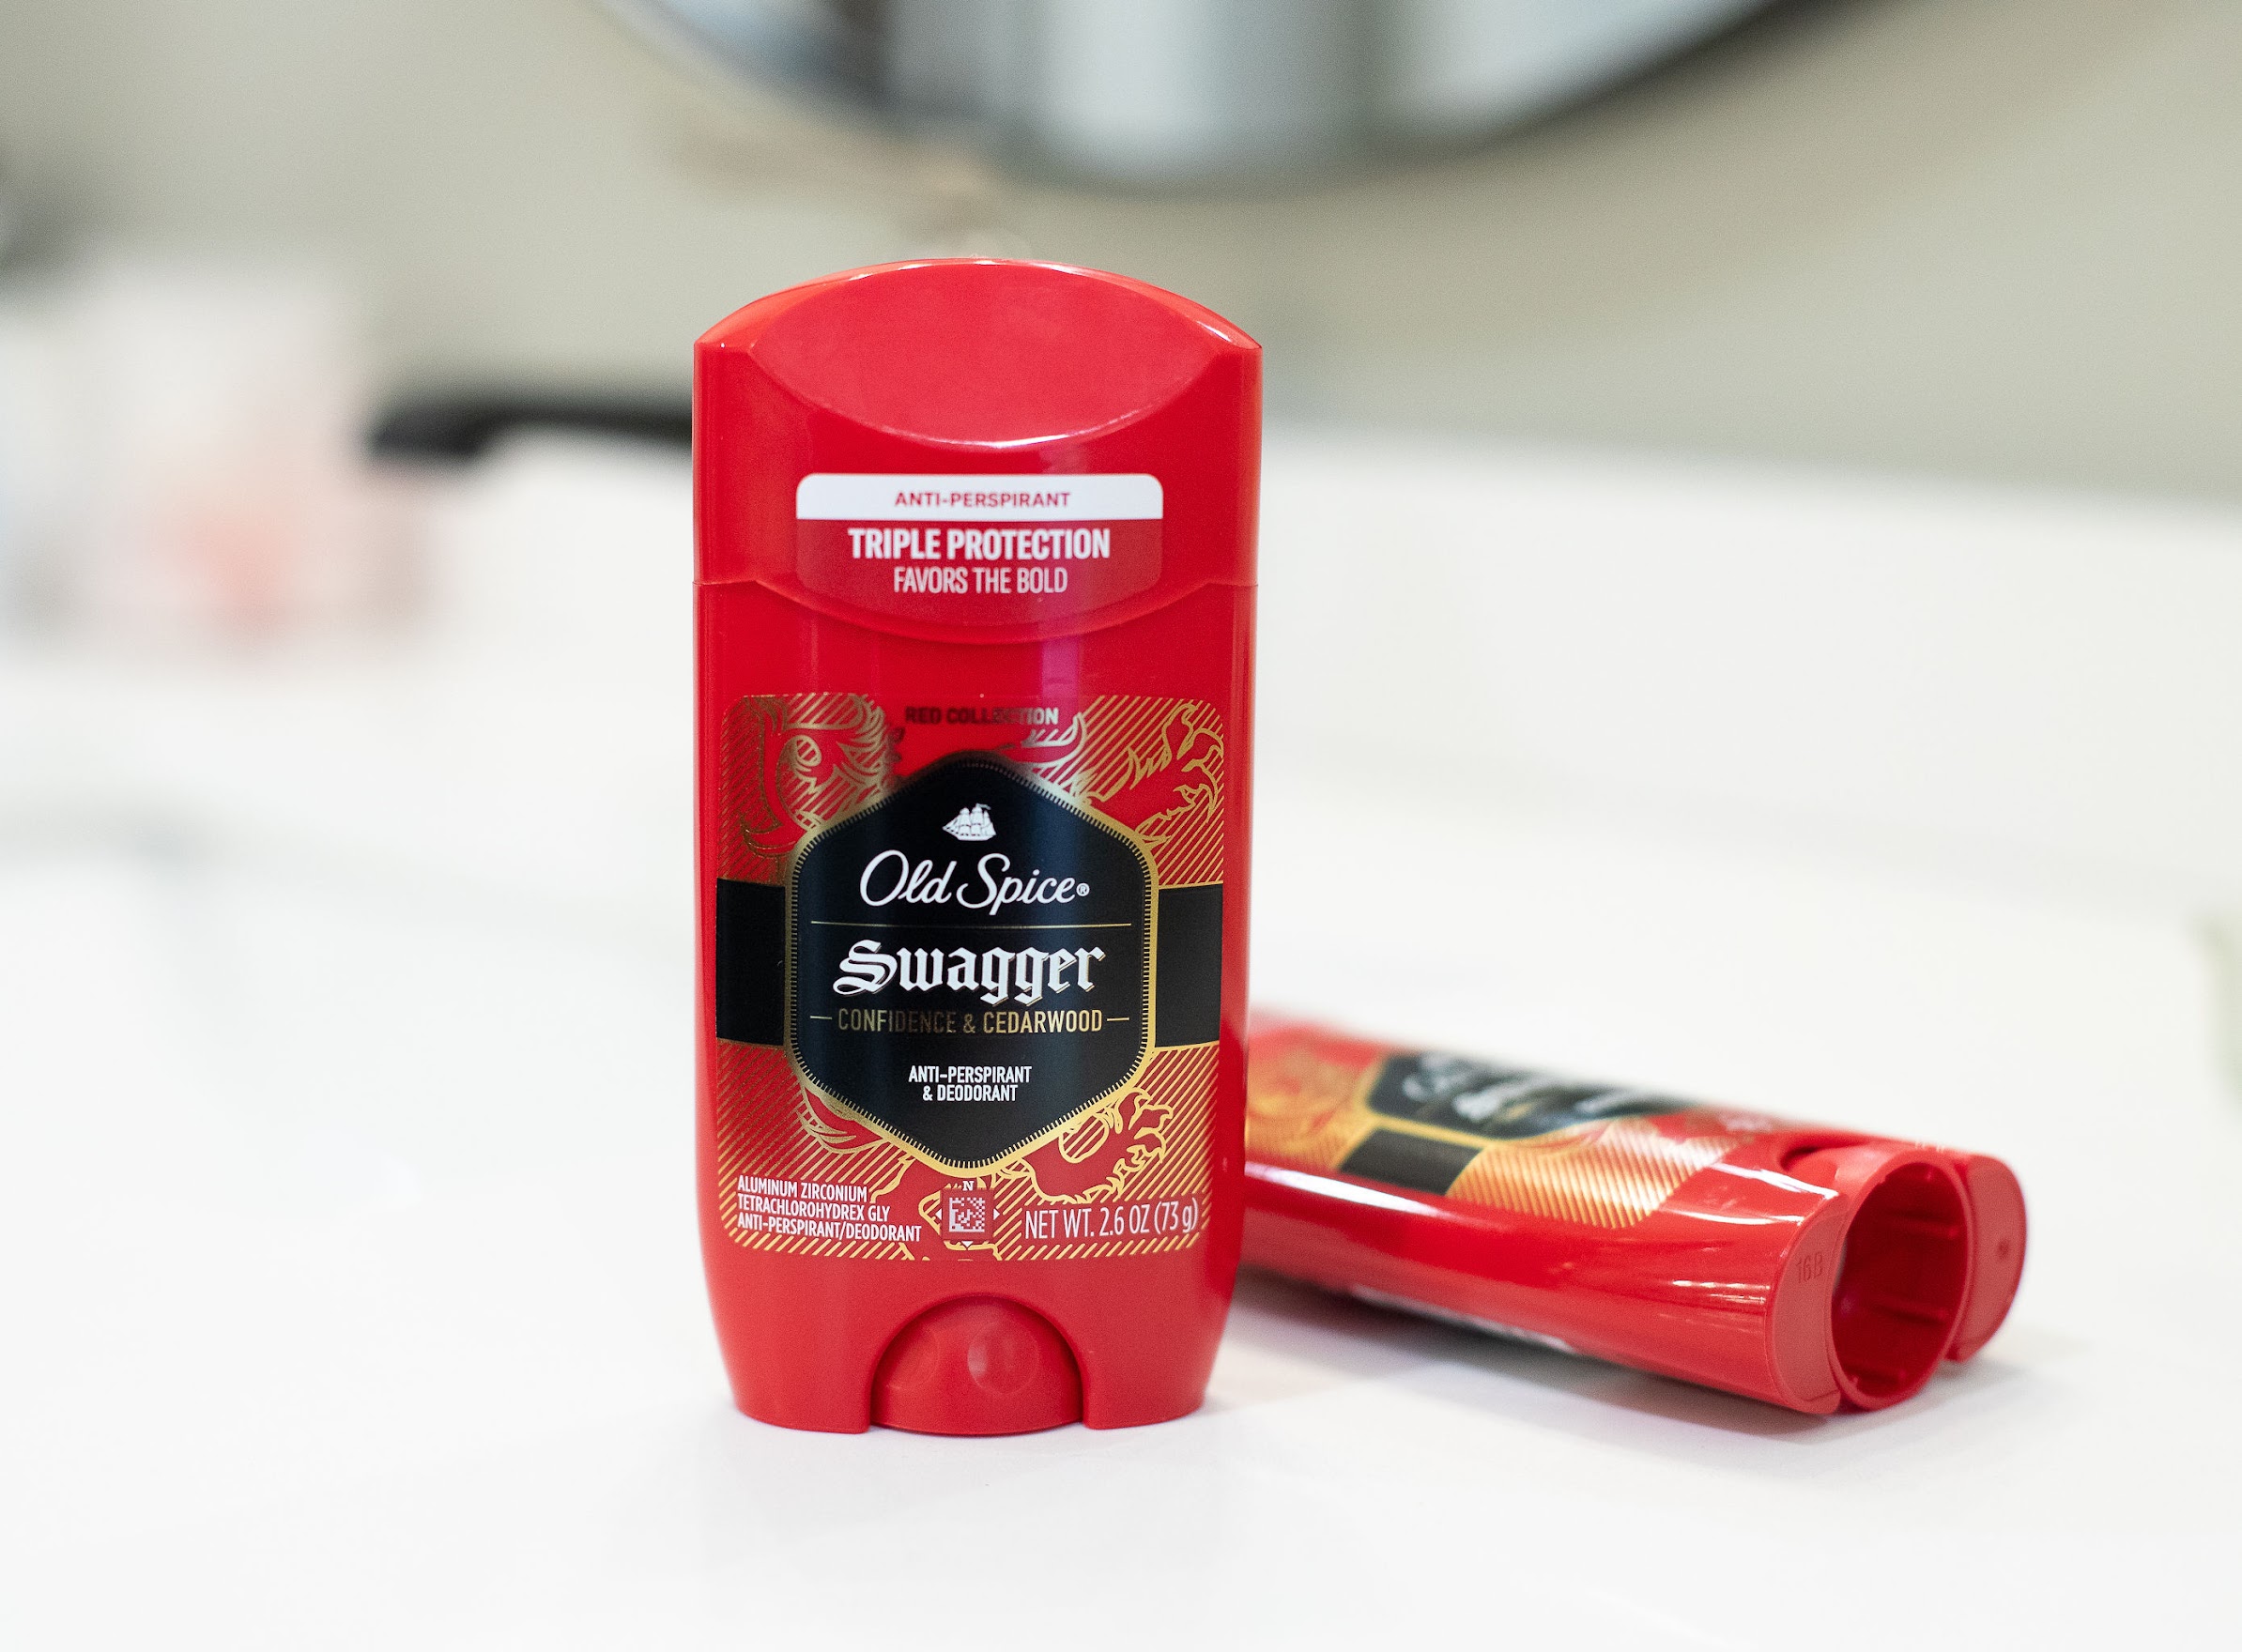 Old Spice Deodorant As Low As $2.33 At Publix (Regular Price $6.10)